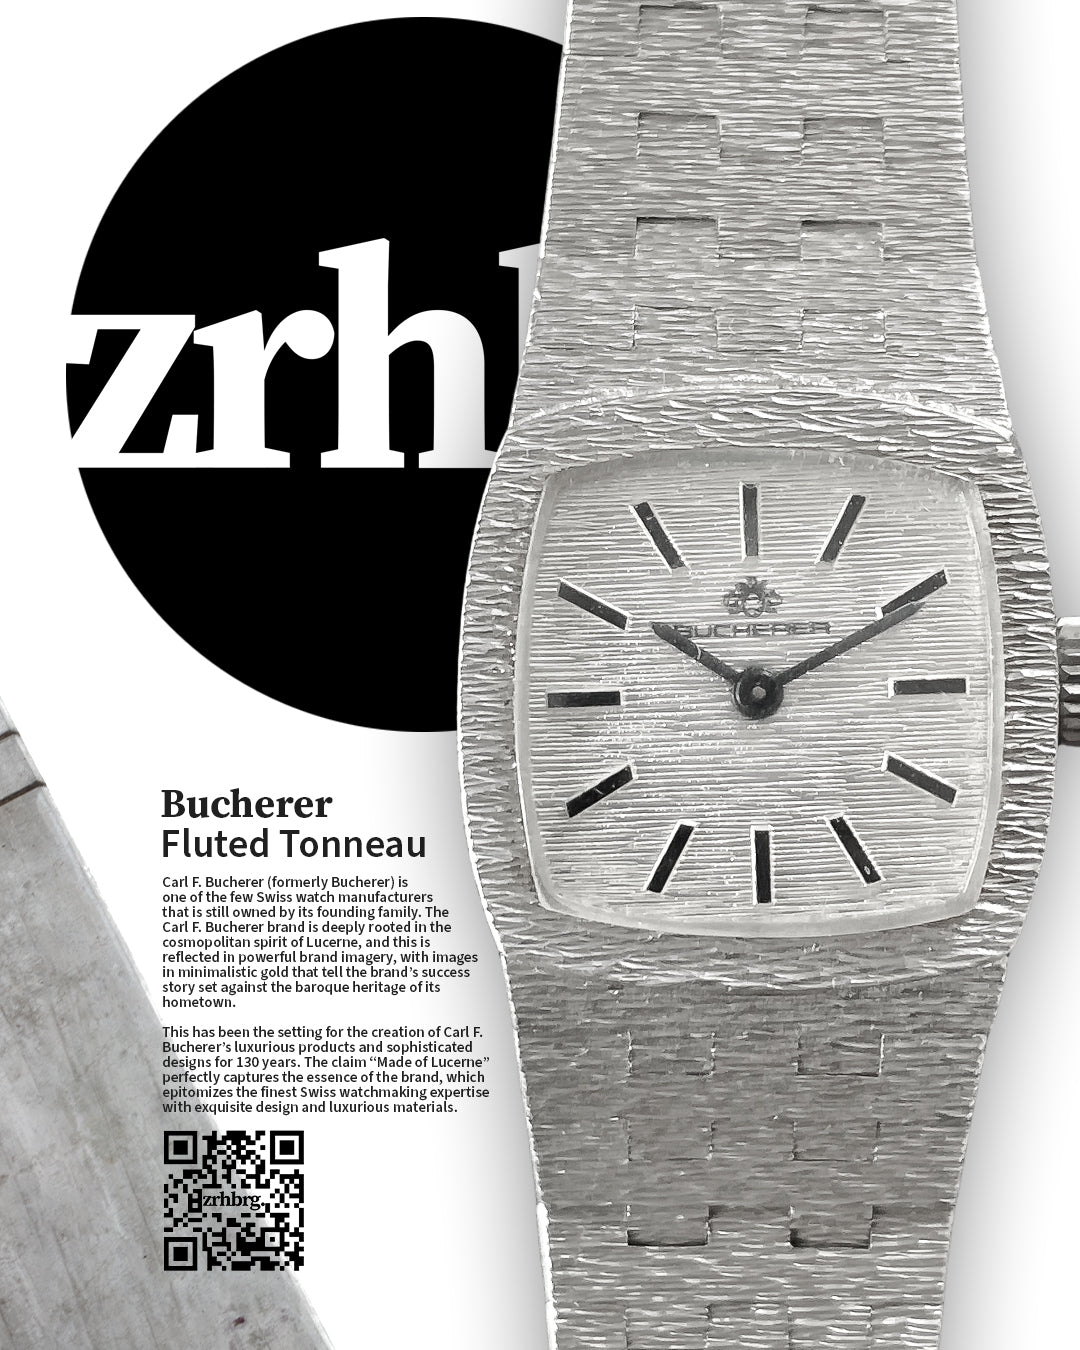 buy a vintage watch or a new one? zürichberg magazine cover with a Bucherer Tonneau Silver Fluted Surface and a short description of the heritage of CFB